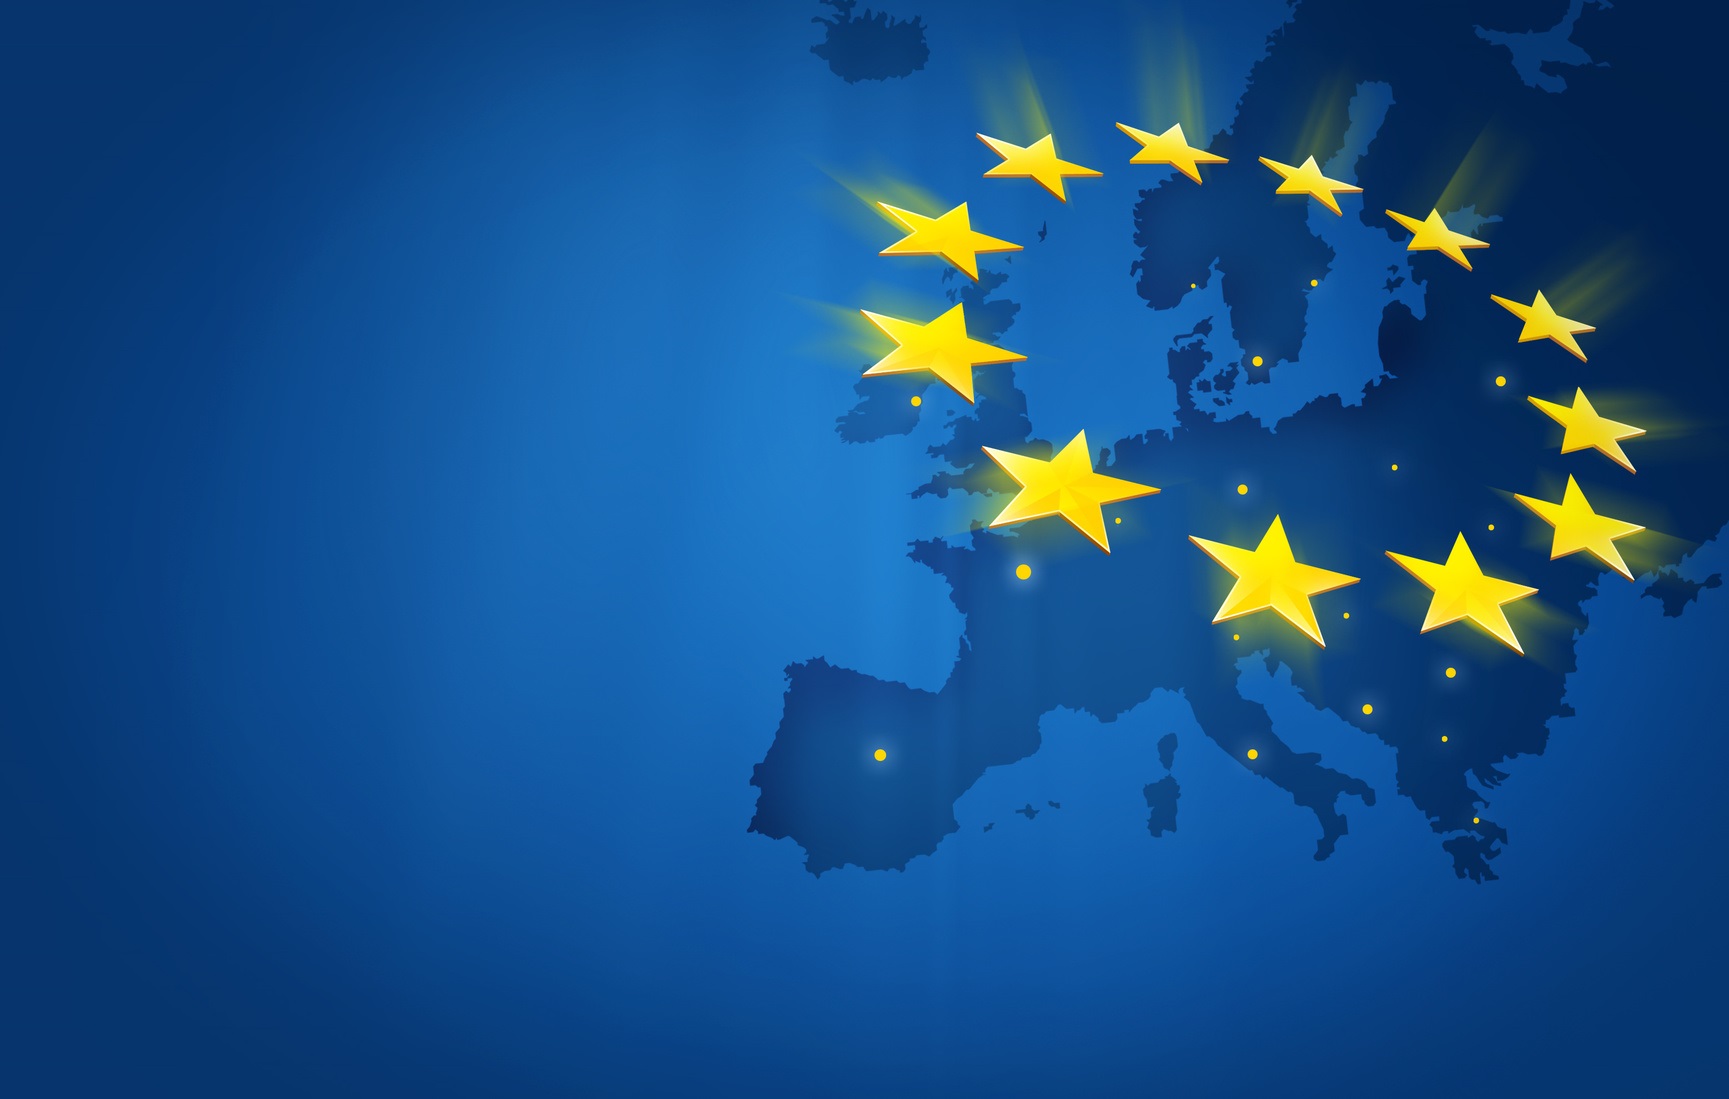 Online Poker in the EU in 2016: What Soared and What Sizzled